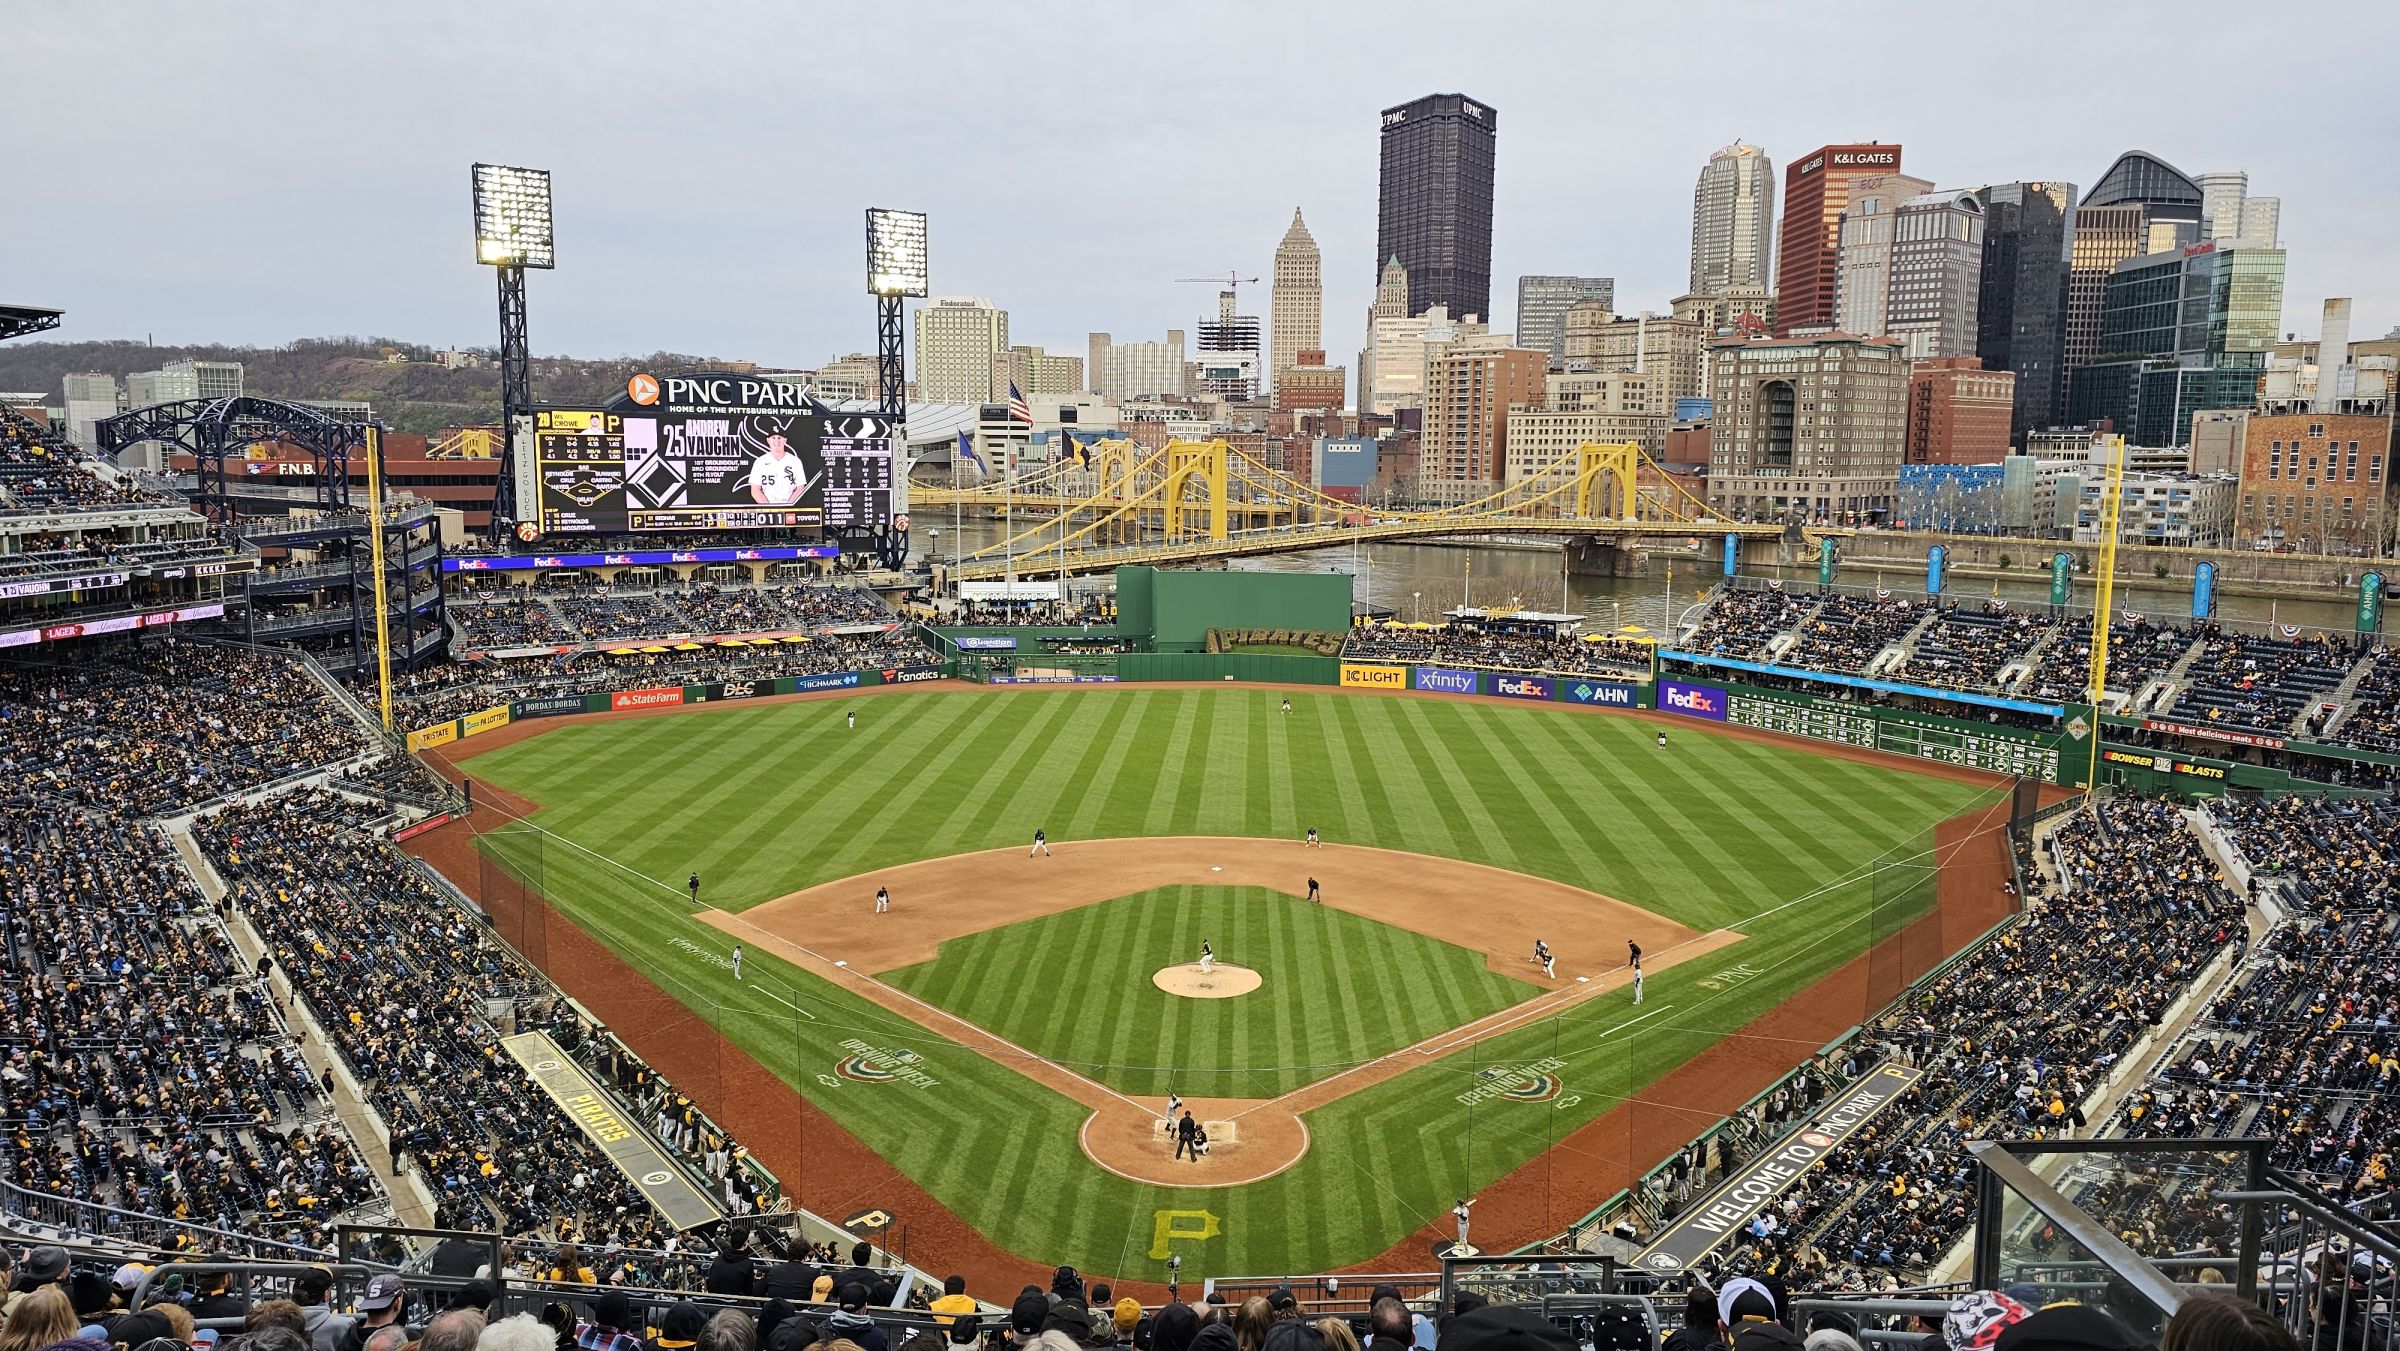 section 316, row n seat view  - pnc park